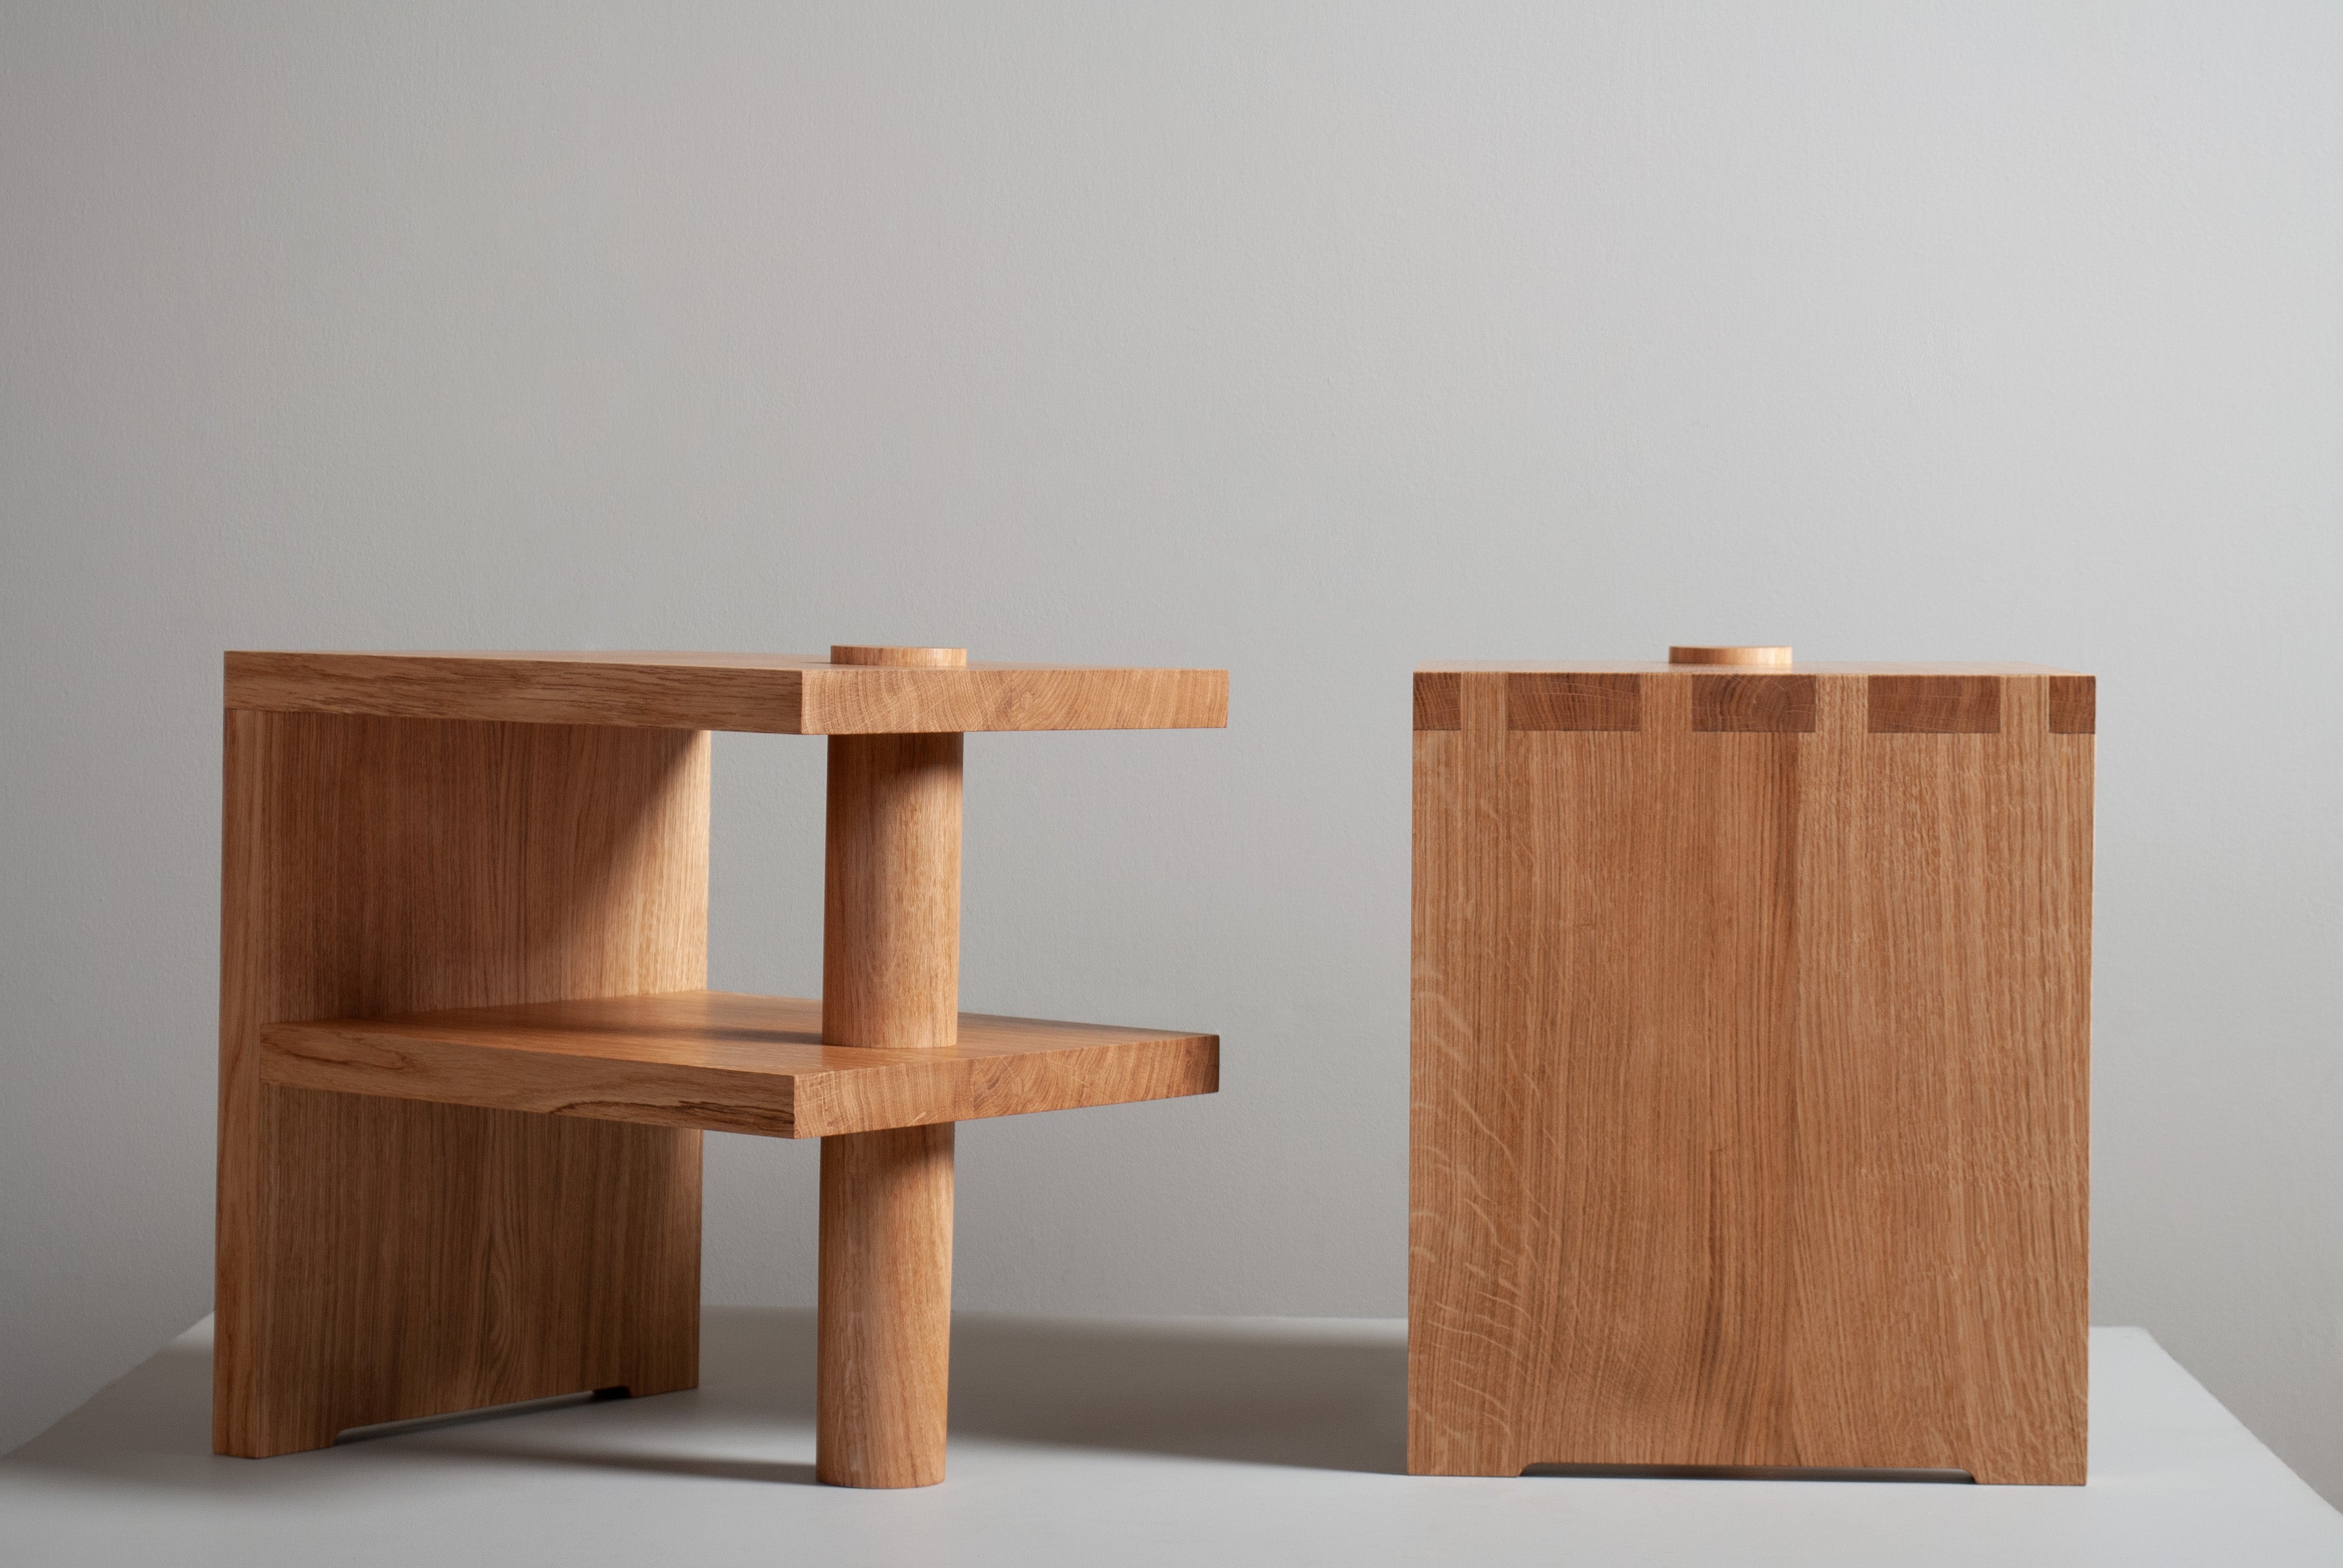 Architectural oak Pillar nightstands or end tables. Early European modernism inspired - with a hint of Japanese minimalism - always focusing on the beauty of the materials. 
Designed by SUM furniture and handcrafted in England using traditional